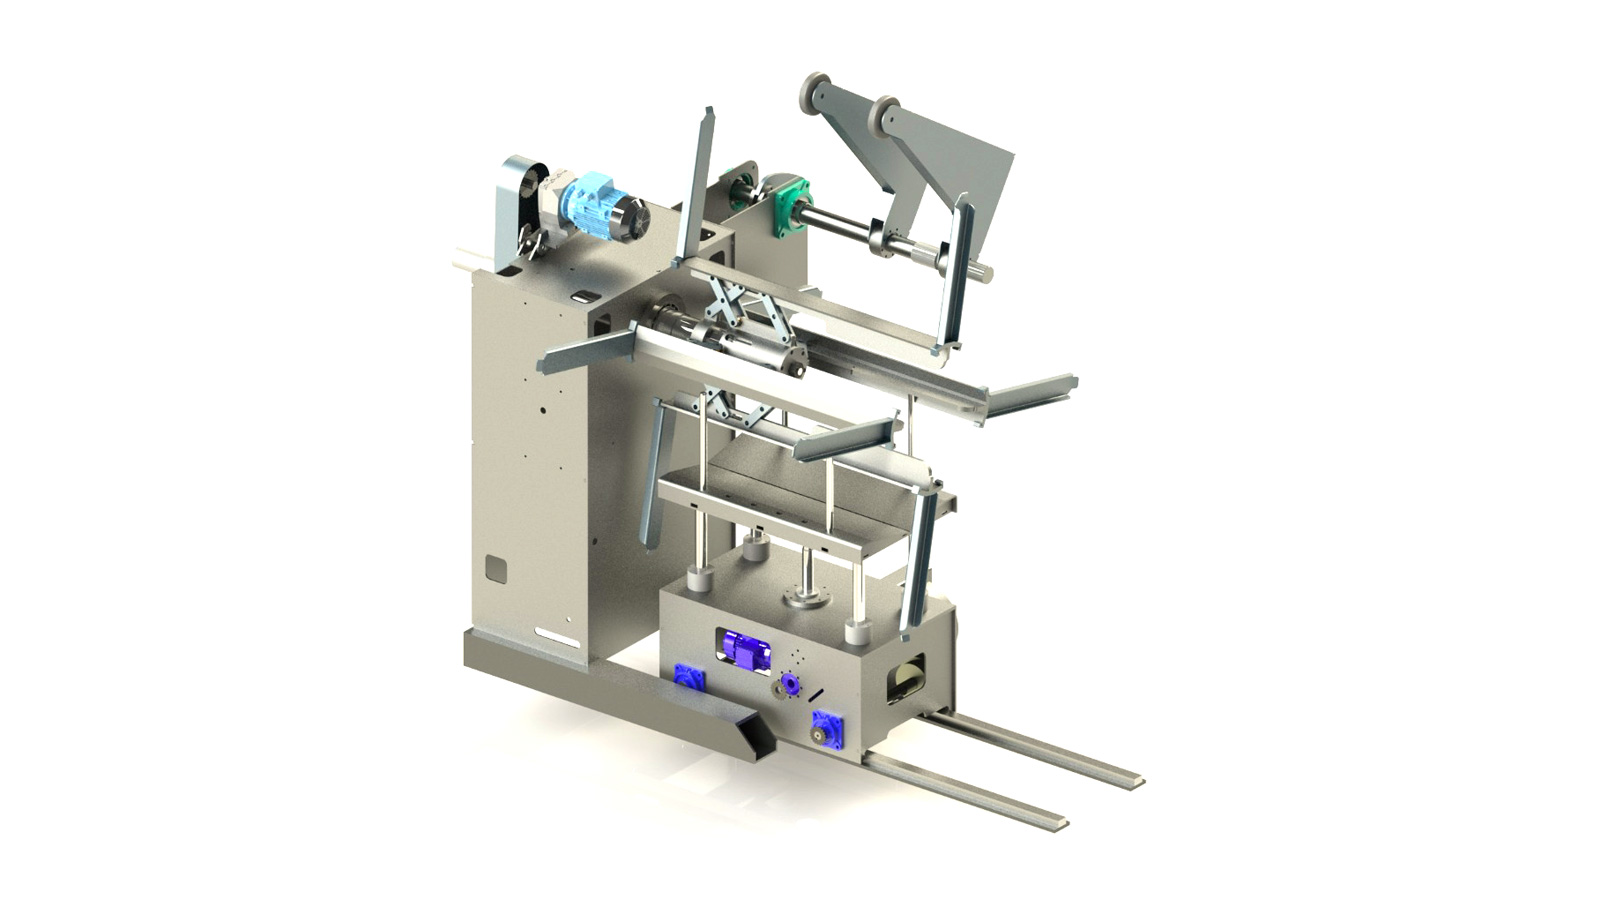 Uncoiler 1300 || Trazor Machine | Drivers (Press Feeding), Rectified Mini Driver, Compact Drivers, Roll Uncoiler, Custom Design Press Drivers, Rollform, Cartesian Transfer Robots, Conveyors, Assembly Machines, Factory Automation, Profiles